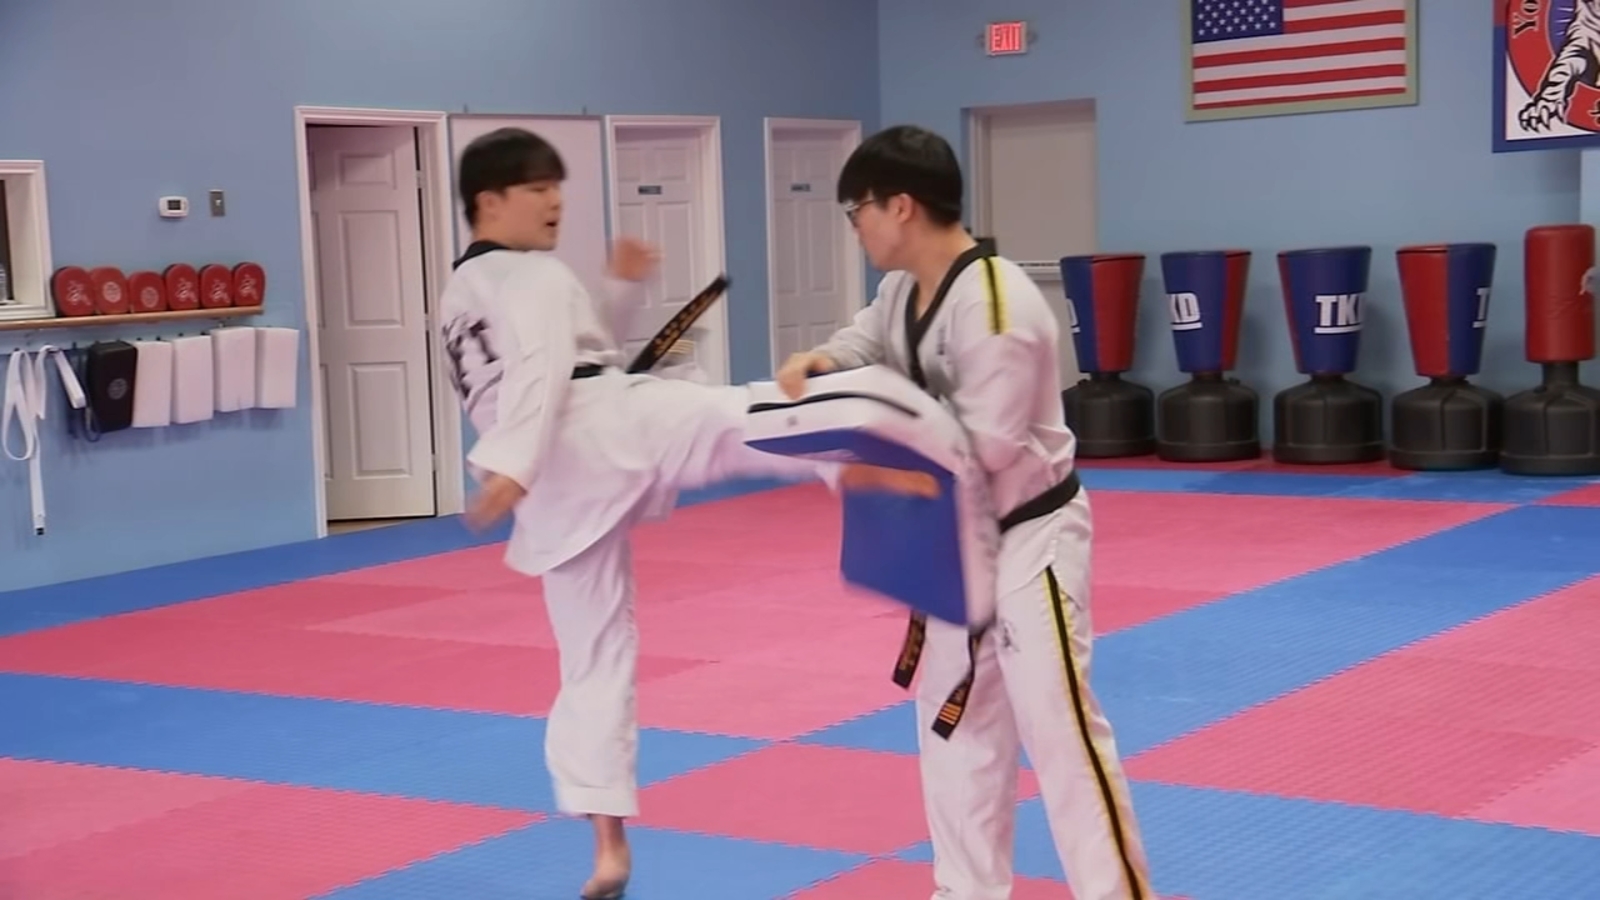 Katy Tae Kwon Do family hailed as heroes after fighting off alleged sex assault suspect from 17-year-old girl [Video]